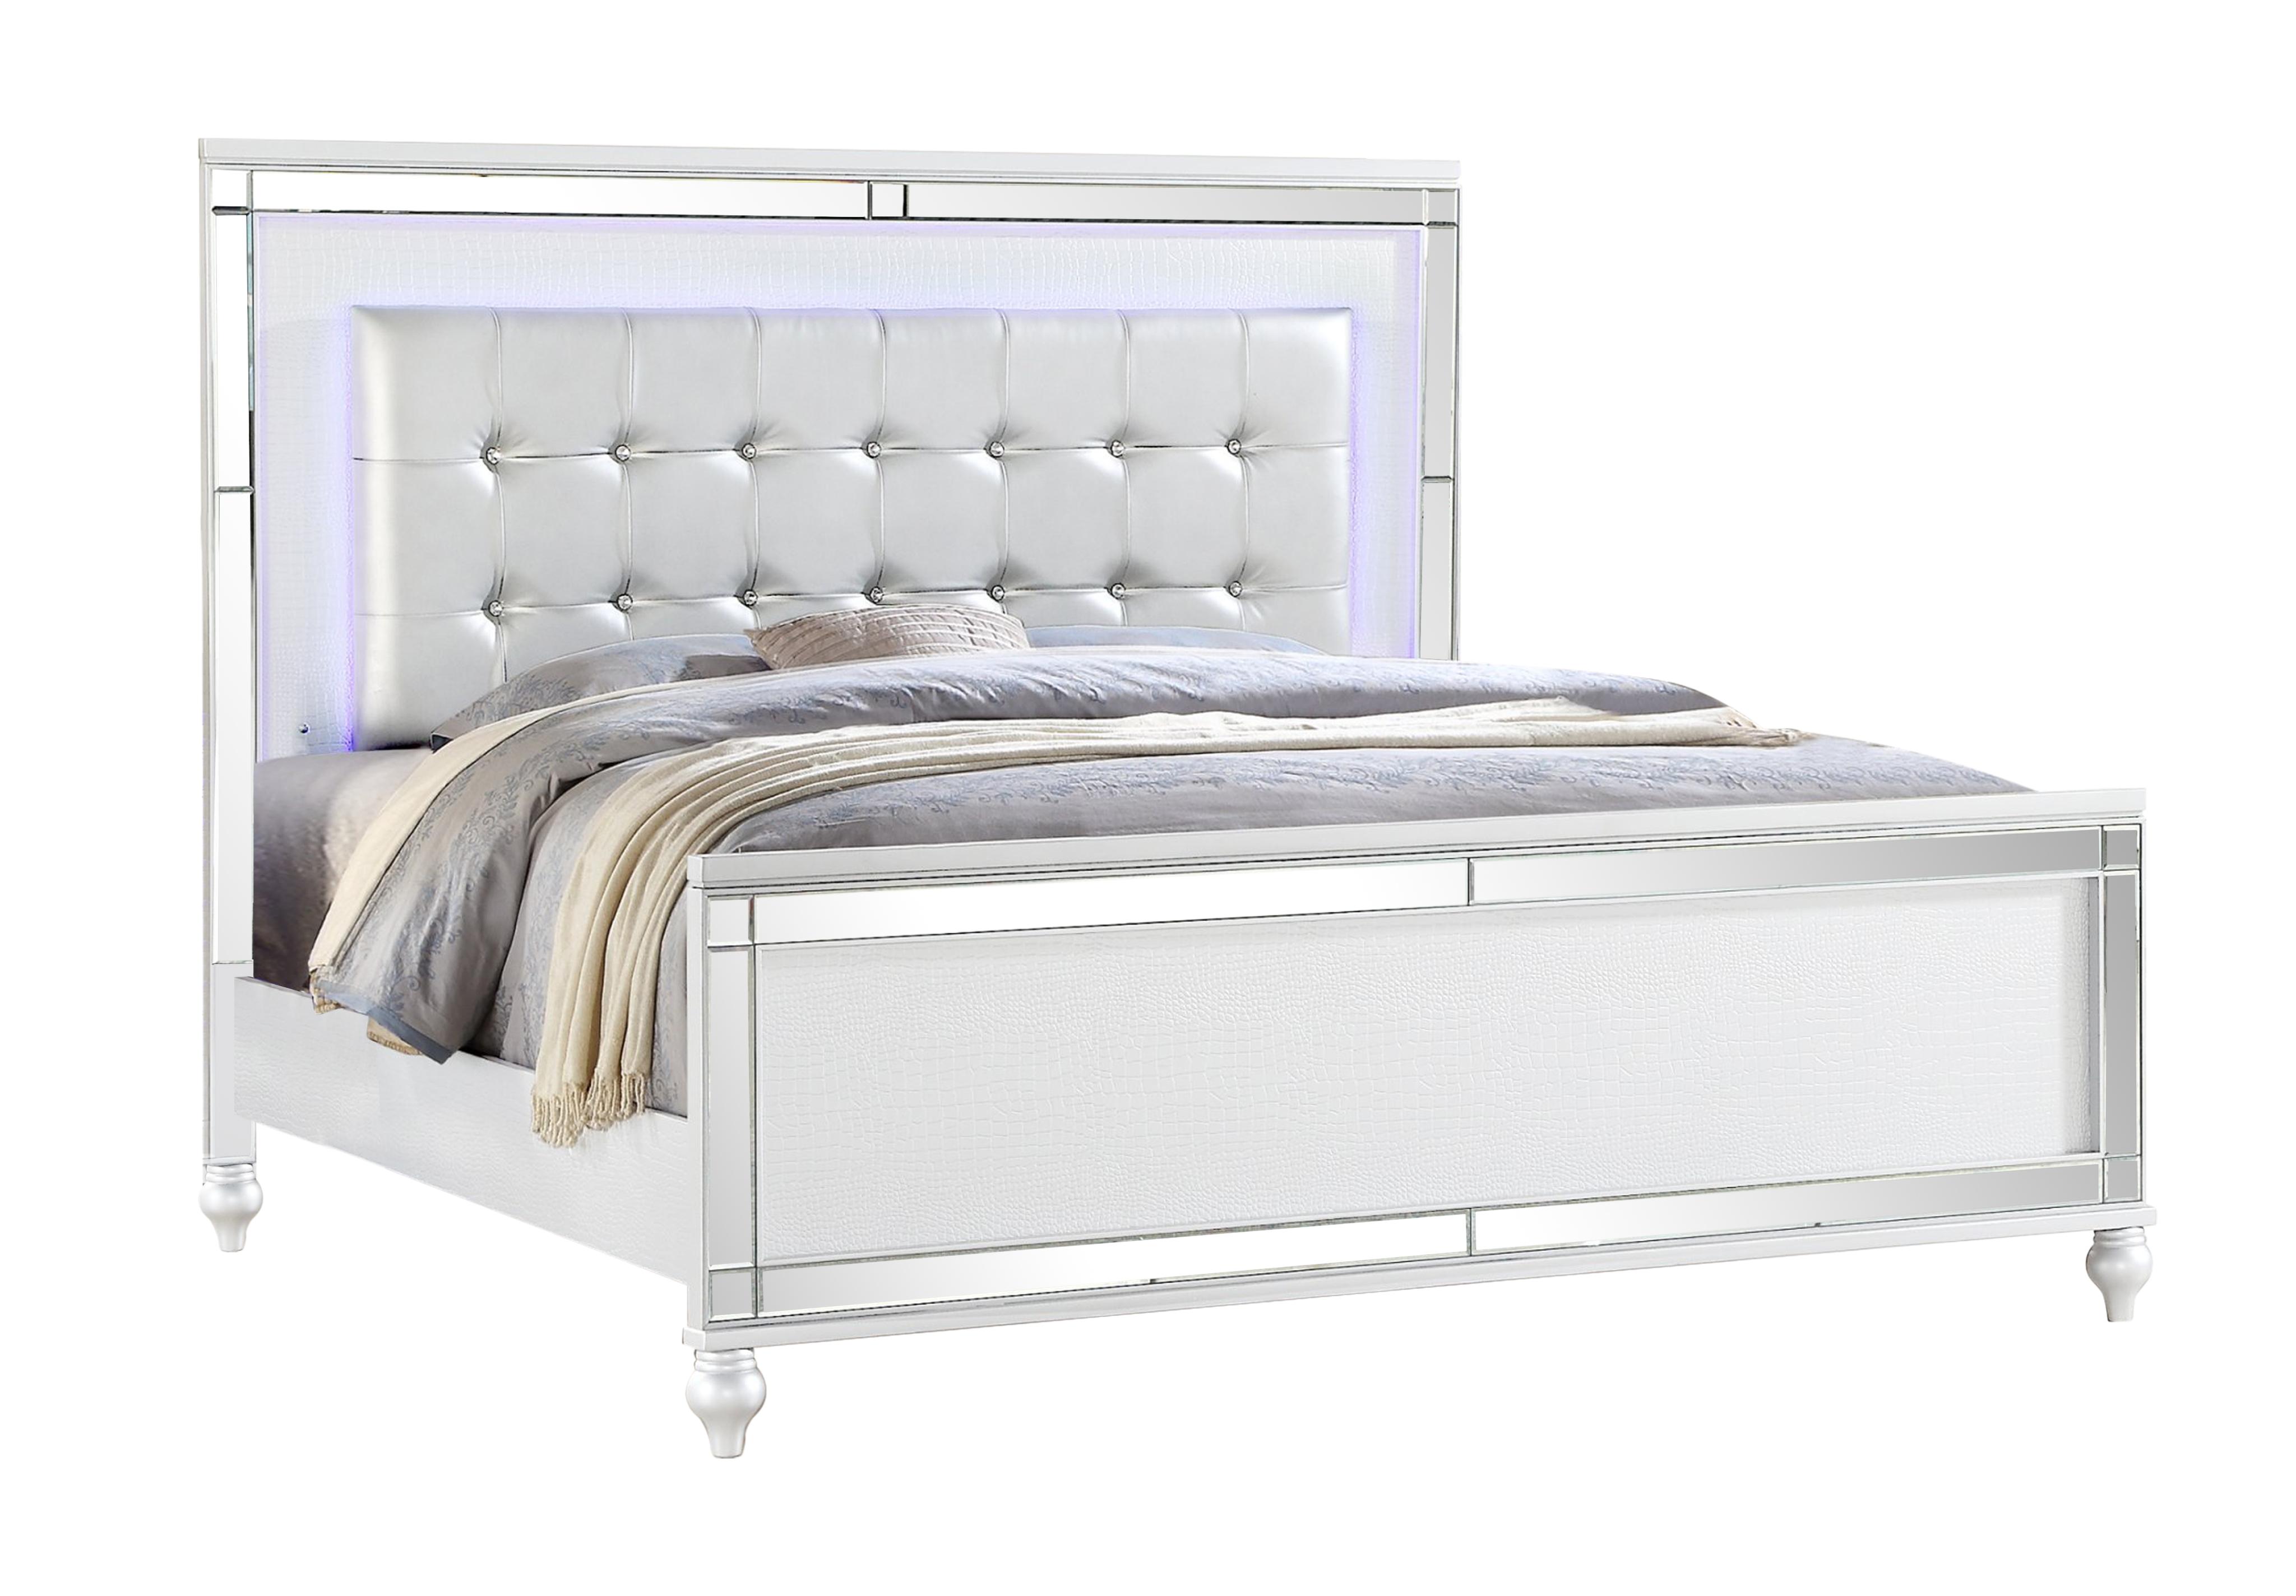 Contemporary, Modern Panel Bed STERLING White GHF-808857726636 in White Eco-Leather